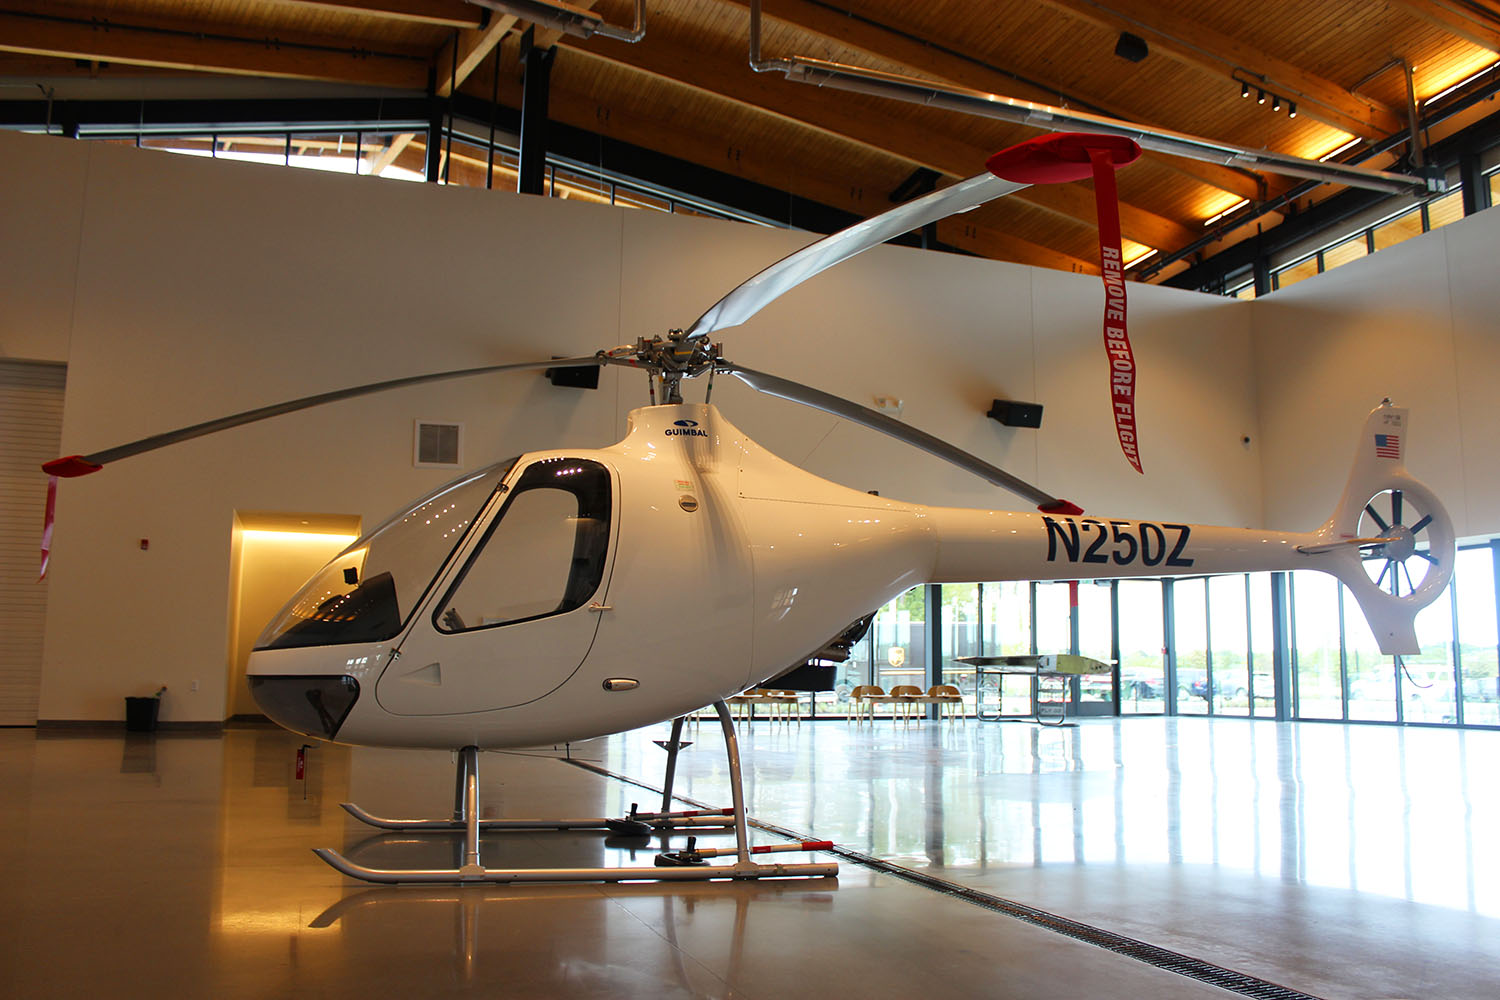 a helicopter on display at The Fieldhouse at Thaden Field Bentonville, AR